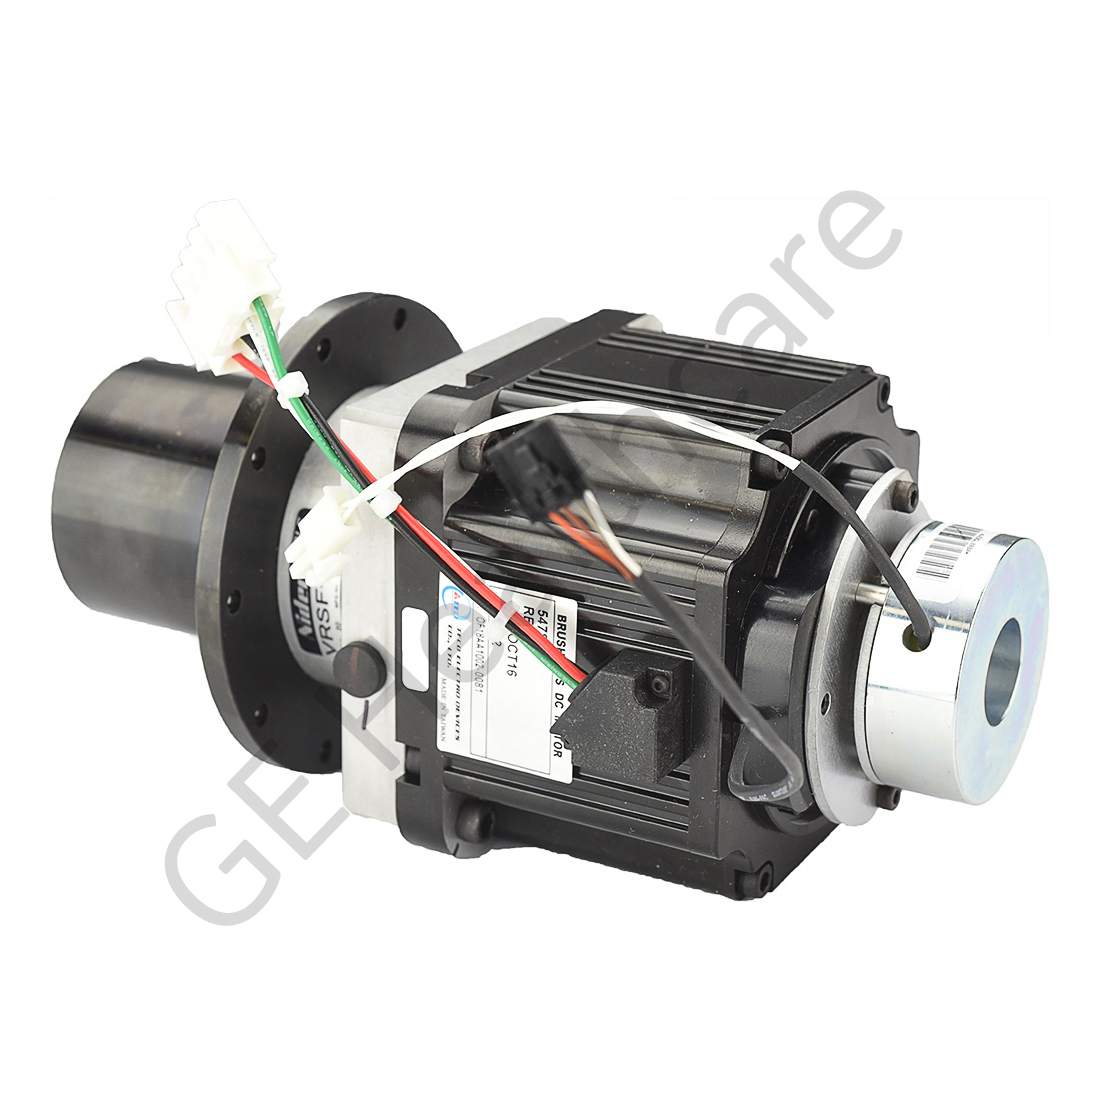 Motor Reducer Assembly with Brake